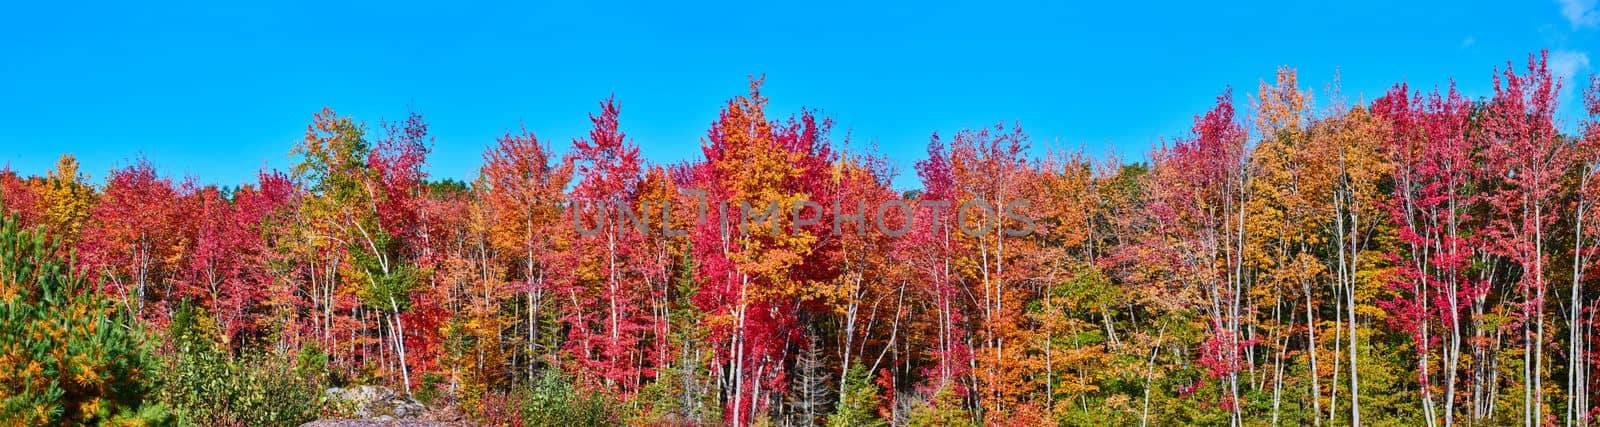 Panorama of forest edge showcasing variety of fall colors by njproductions